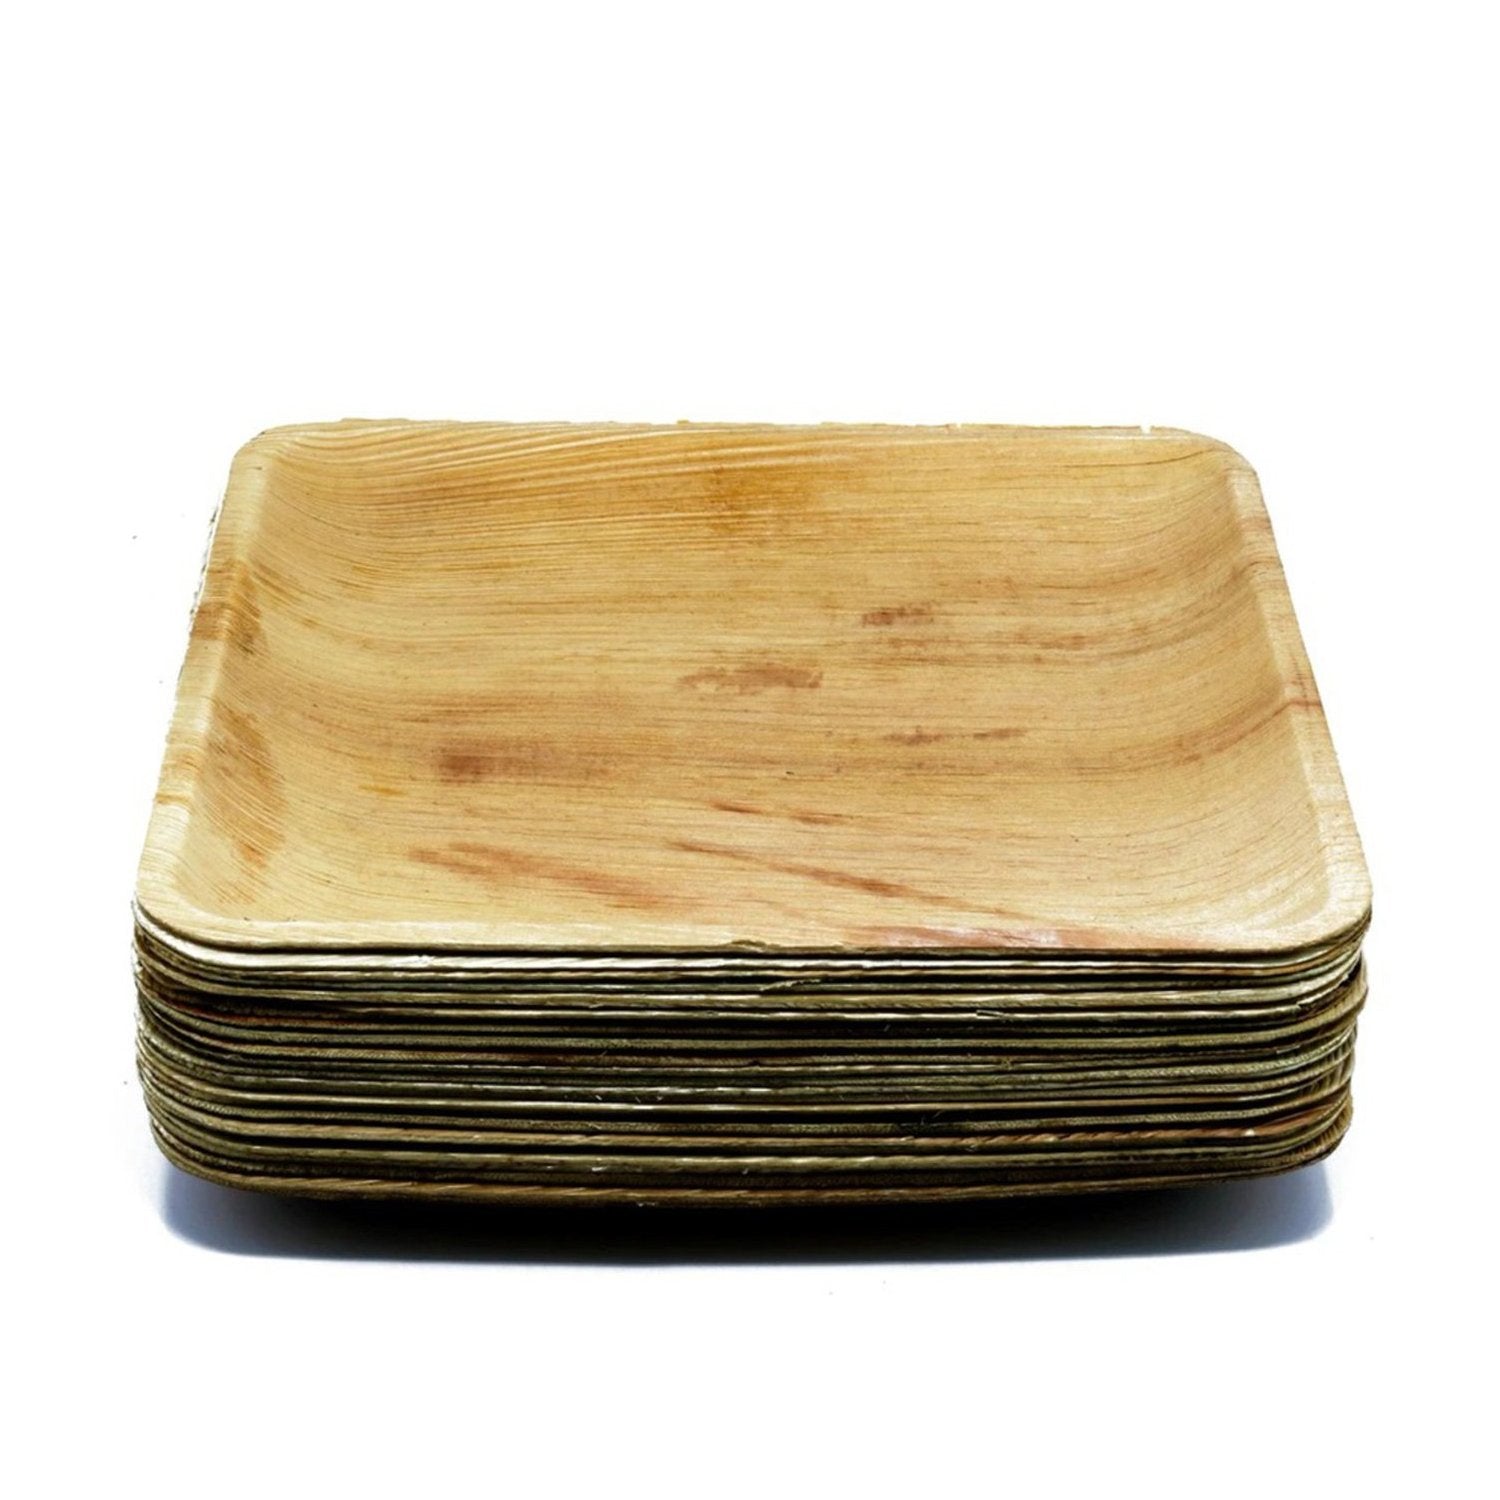 3214 disposable square eco friendly areca palm leaf plate 10x10 inch pack of 25